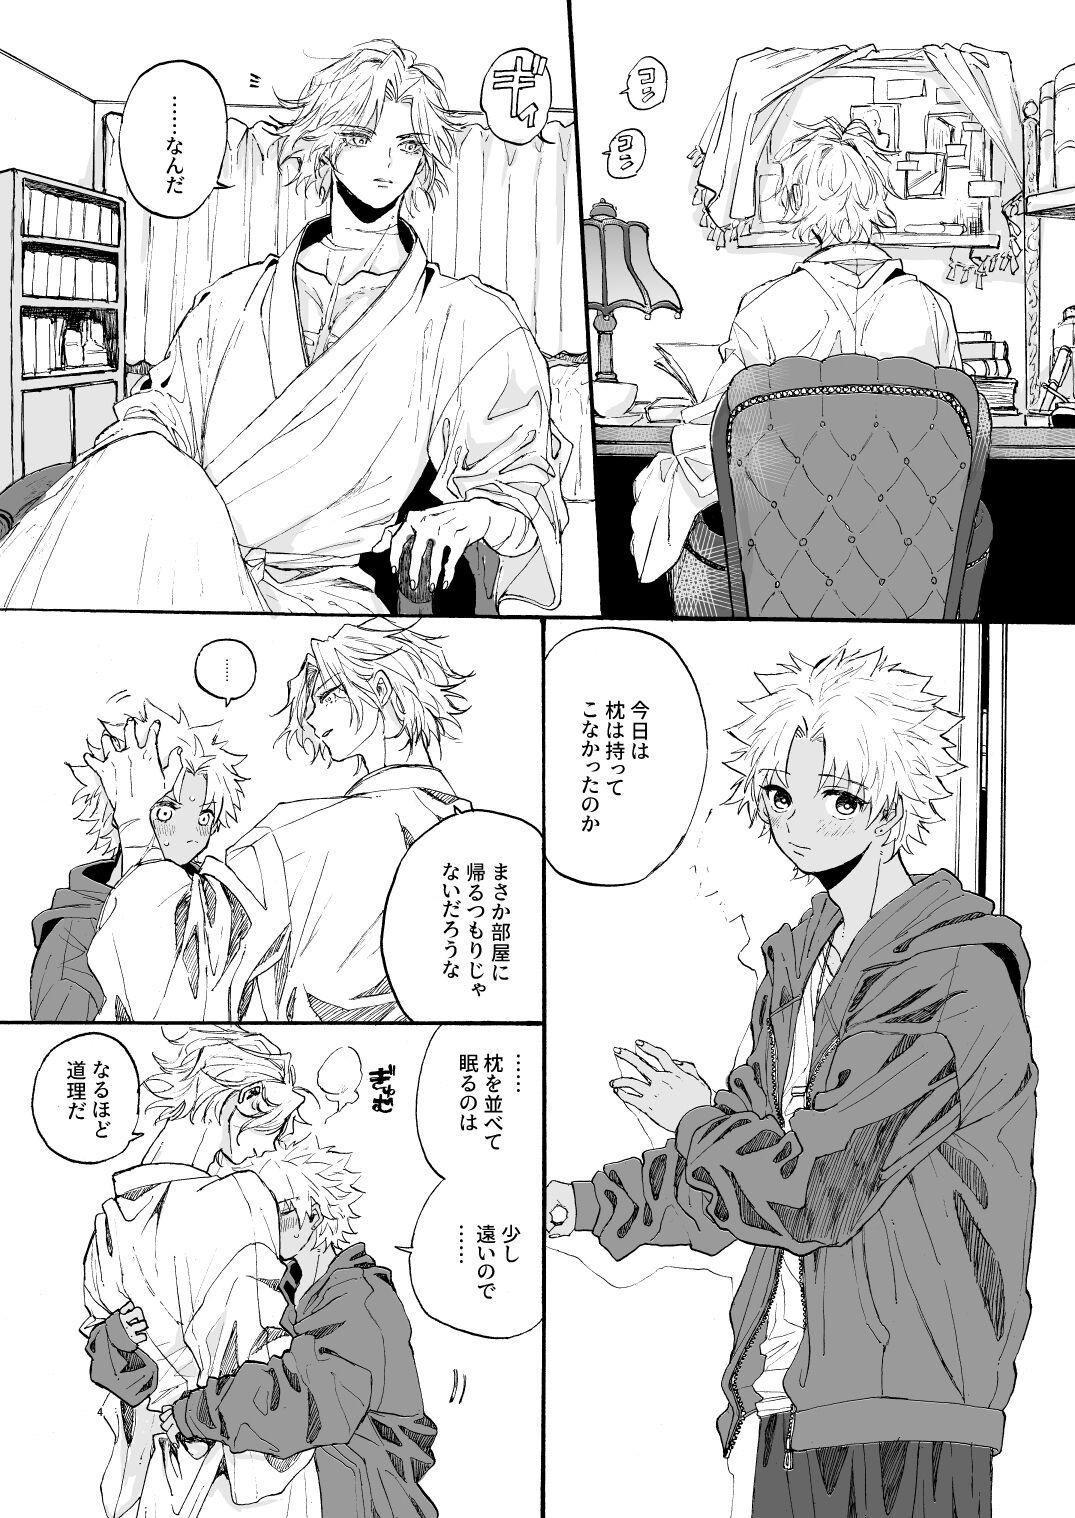 Blond Sotsugyou - Fate grand order Nerd - Page 5